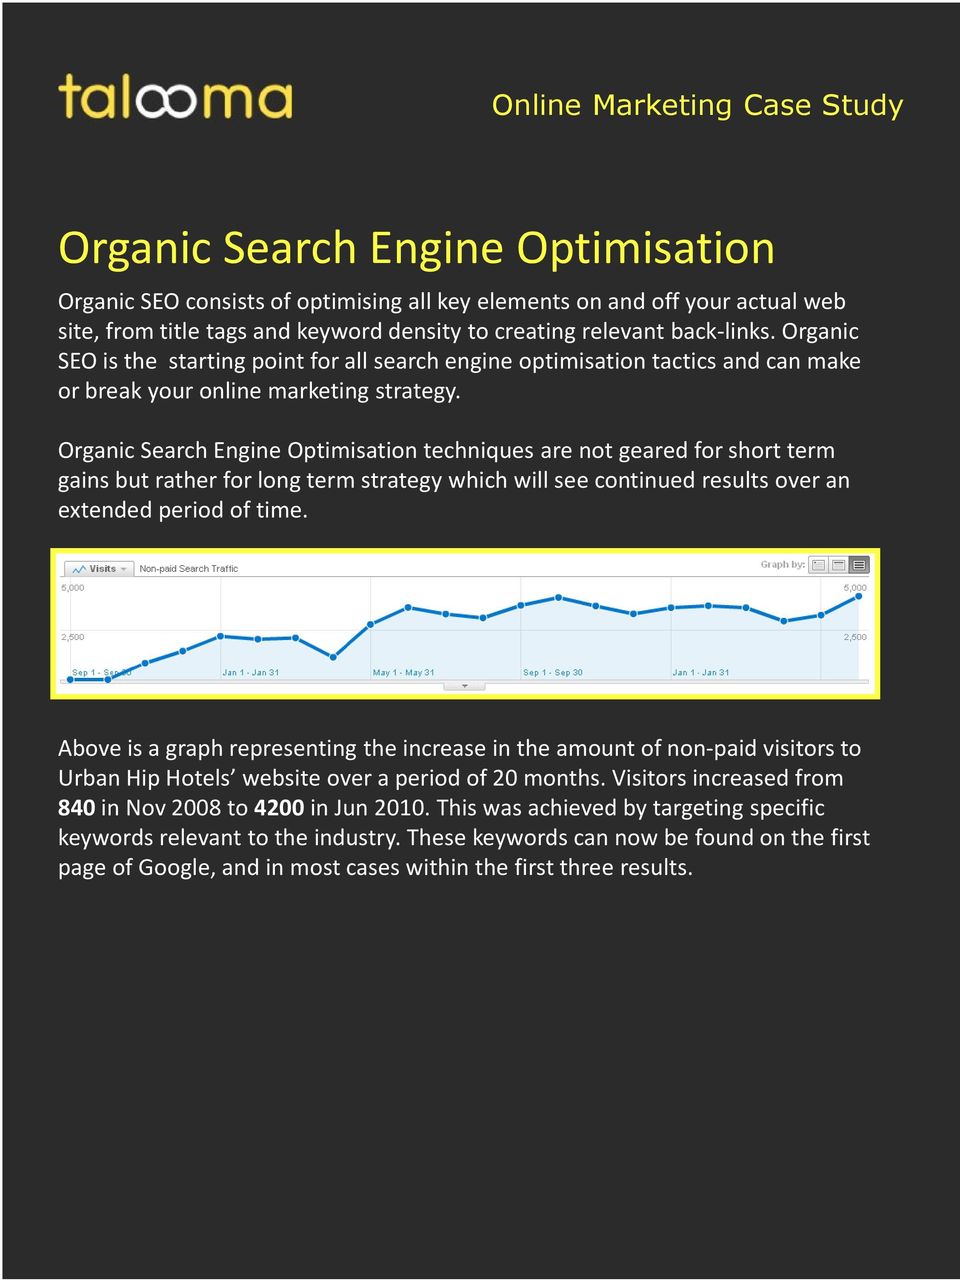 Organic Search Engine Optimisation techniques are not geared for short term gains but rather for long term strategy which will see continued results over an extended period of time.